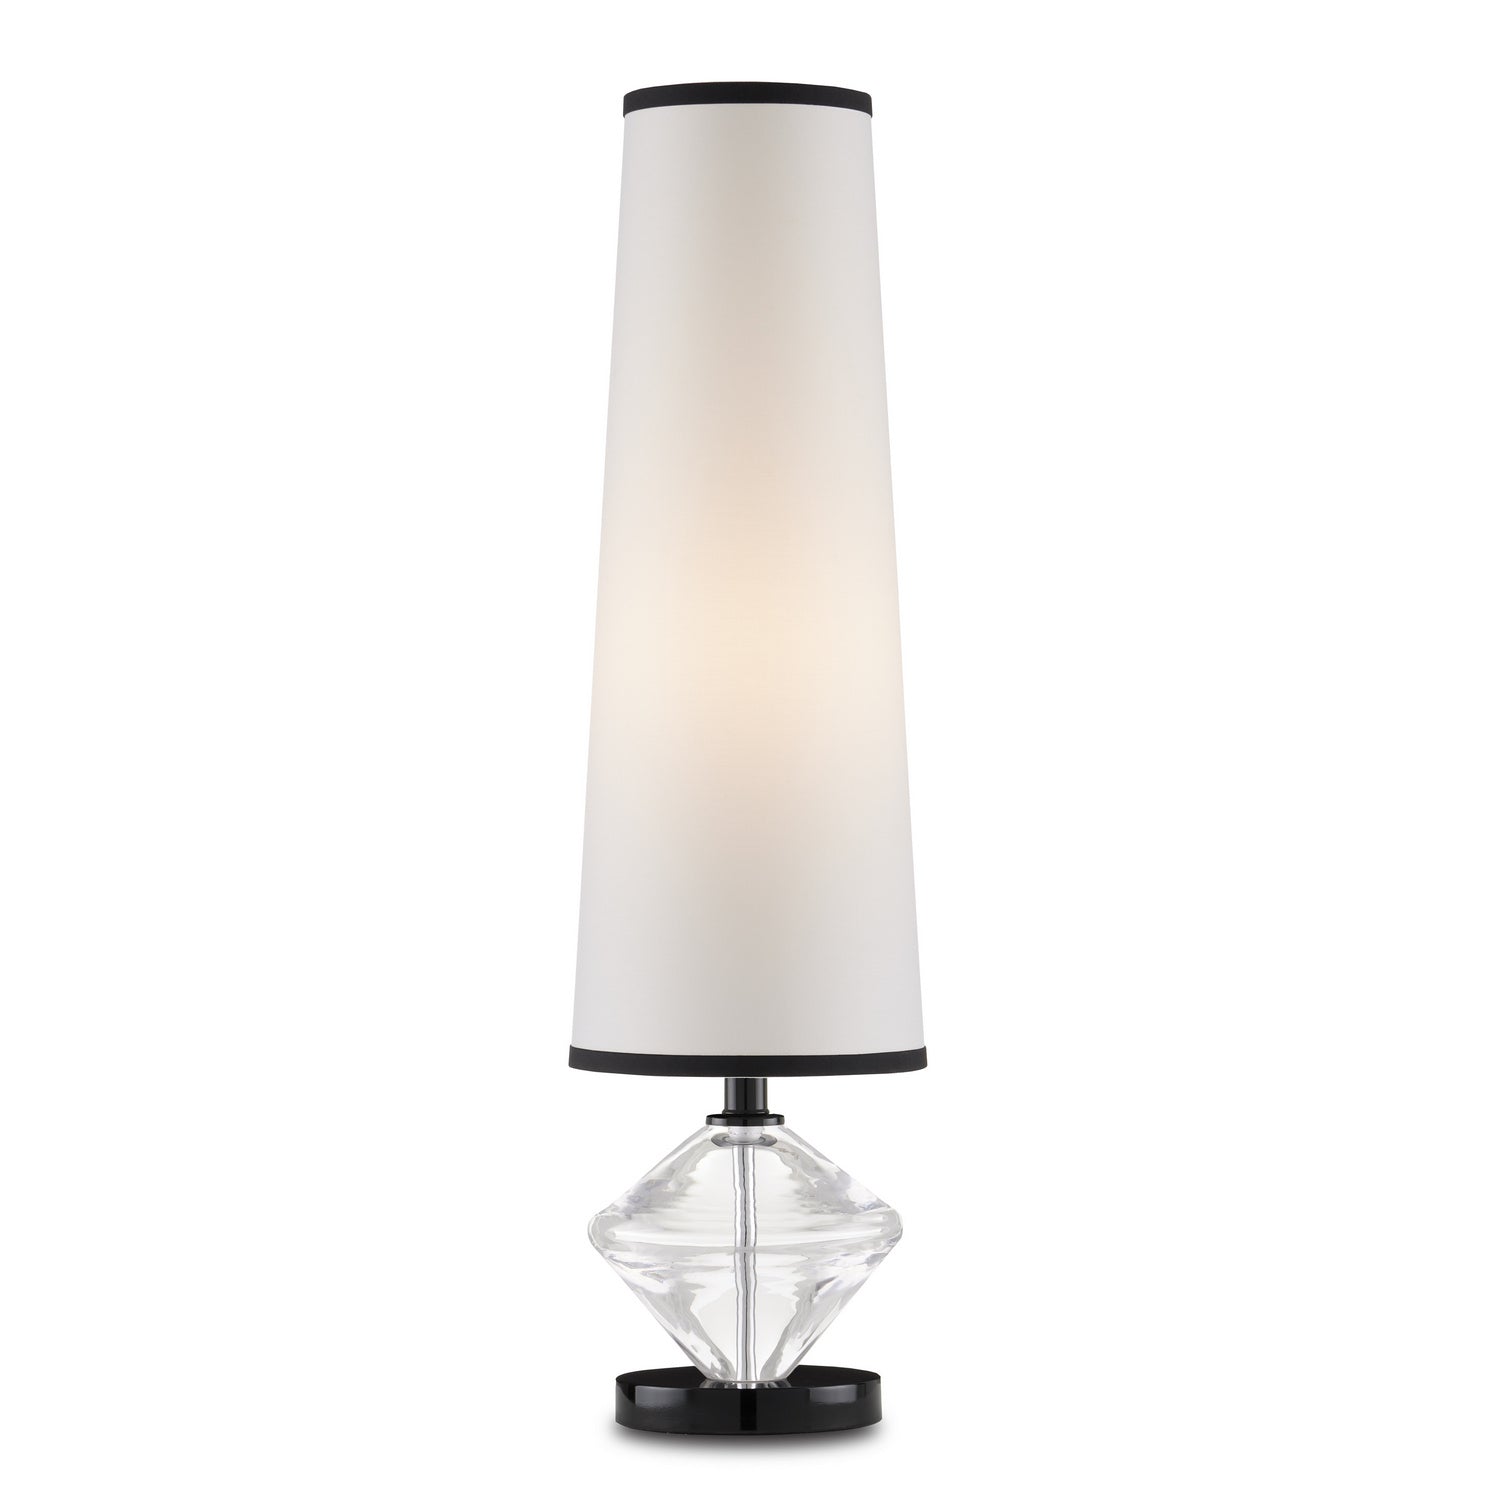 Currey and Company - 6000-0832 - One Light Table Lamp - Whirling Dervish - Clear/Black